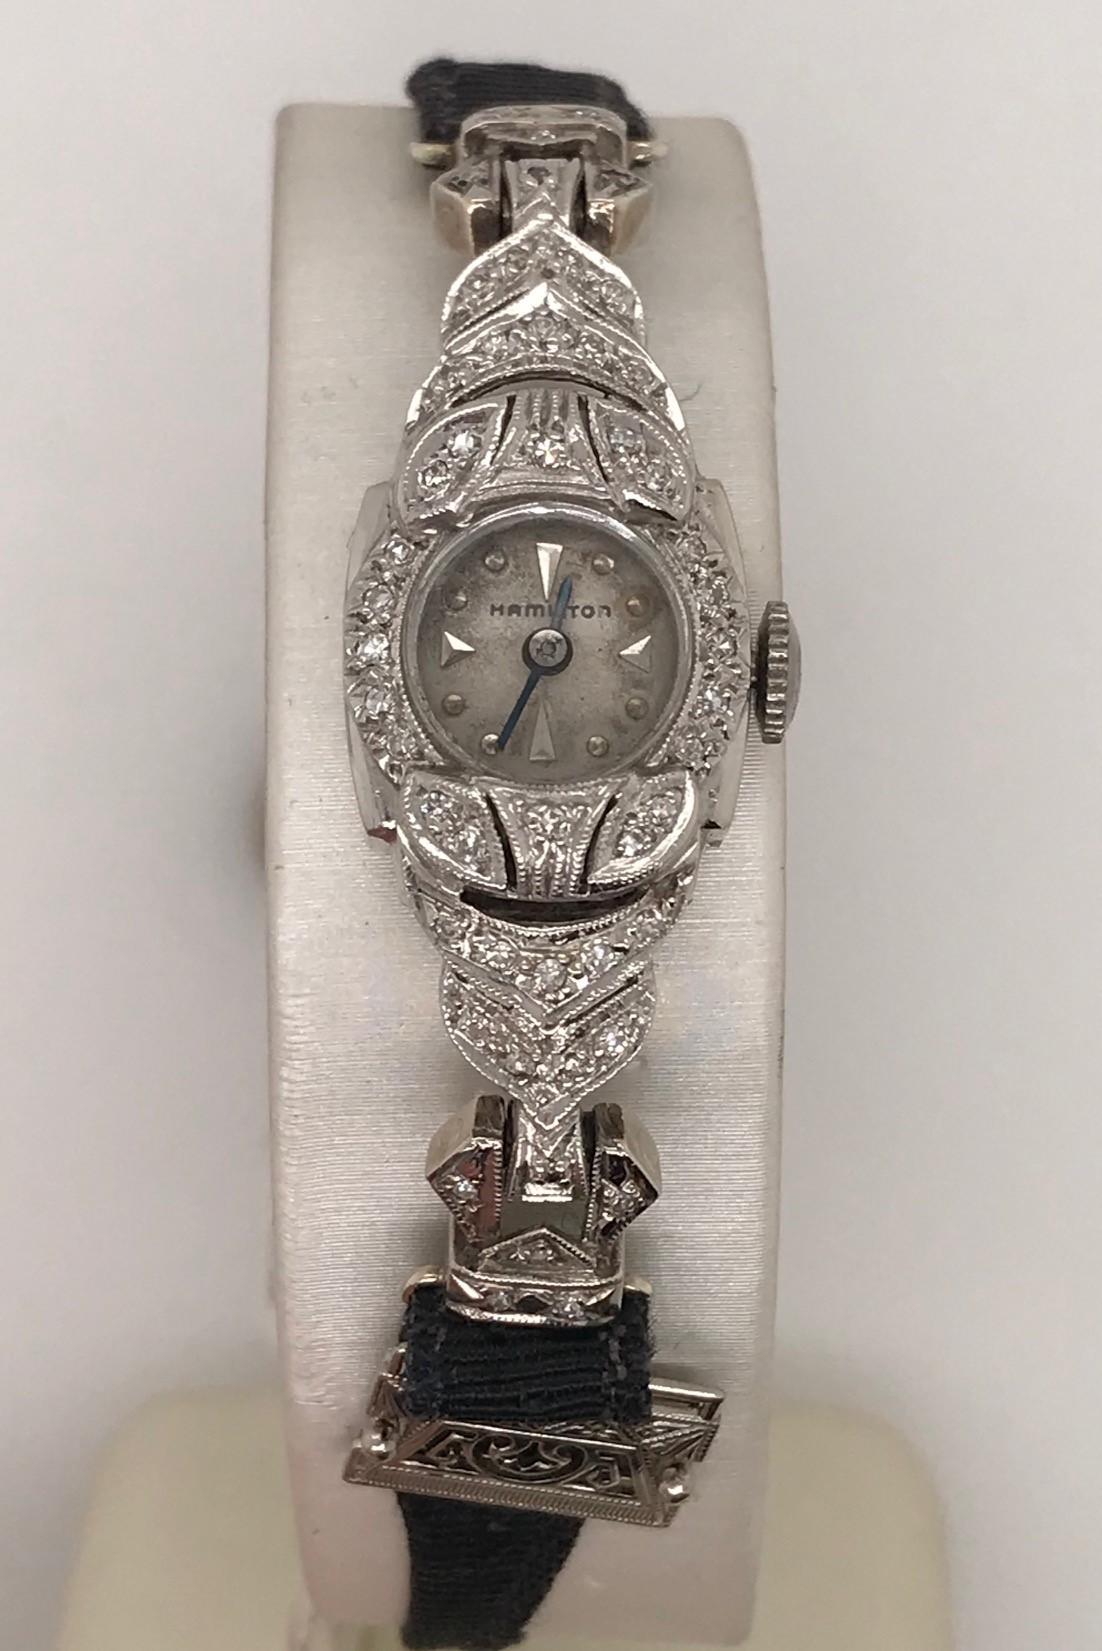 Ladies 14k White Gold Hamilton small wrist watch.  White dial, black grosgrain strap with 50 small diamonds.  This little gem is circa 1940's and will be a beautiful addition to any vintage watch collector. 